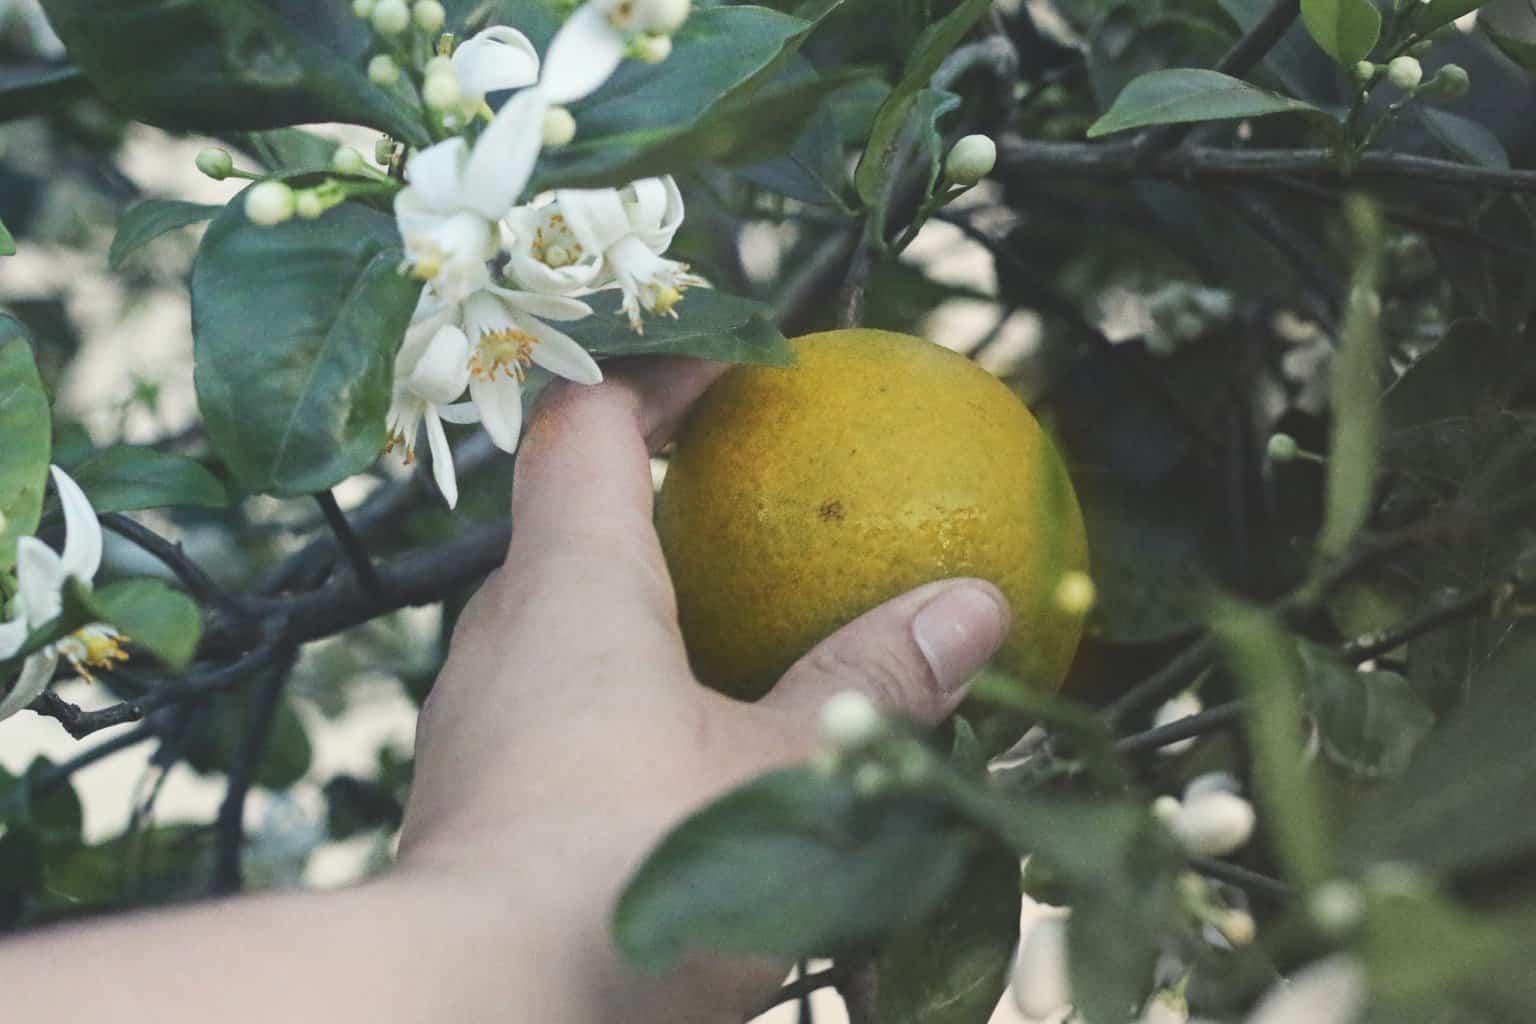 Hand-picking an orange from a citrus tree.